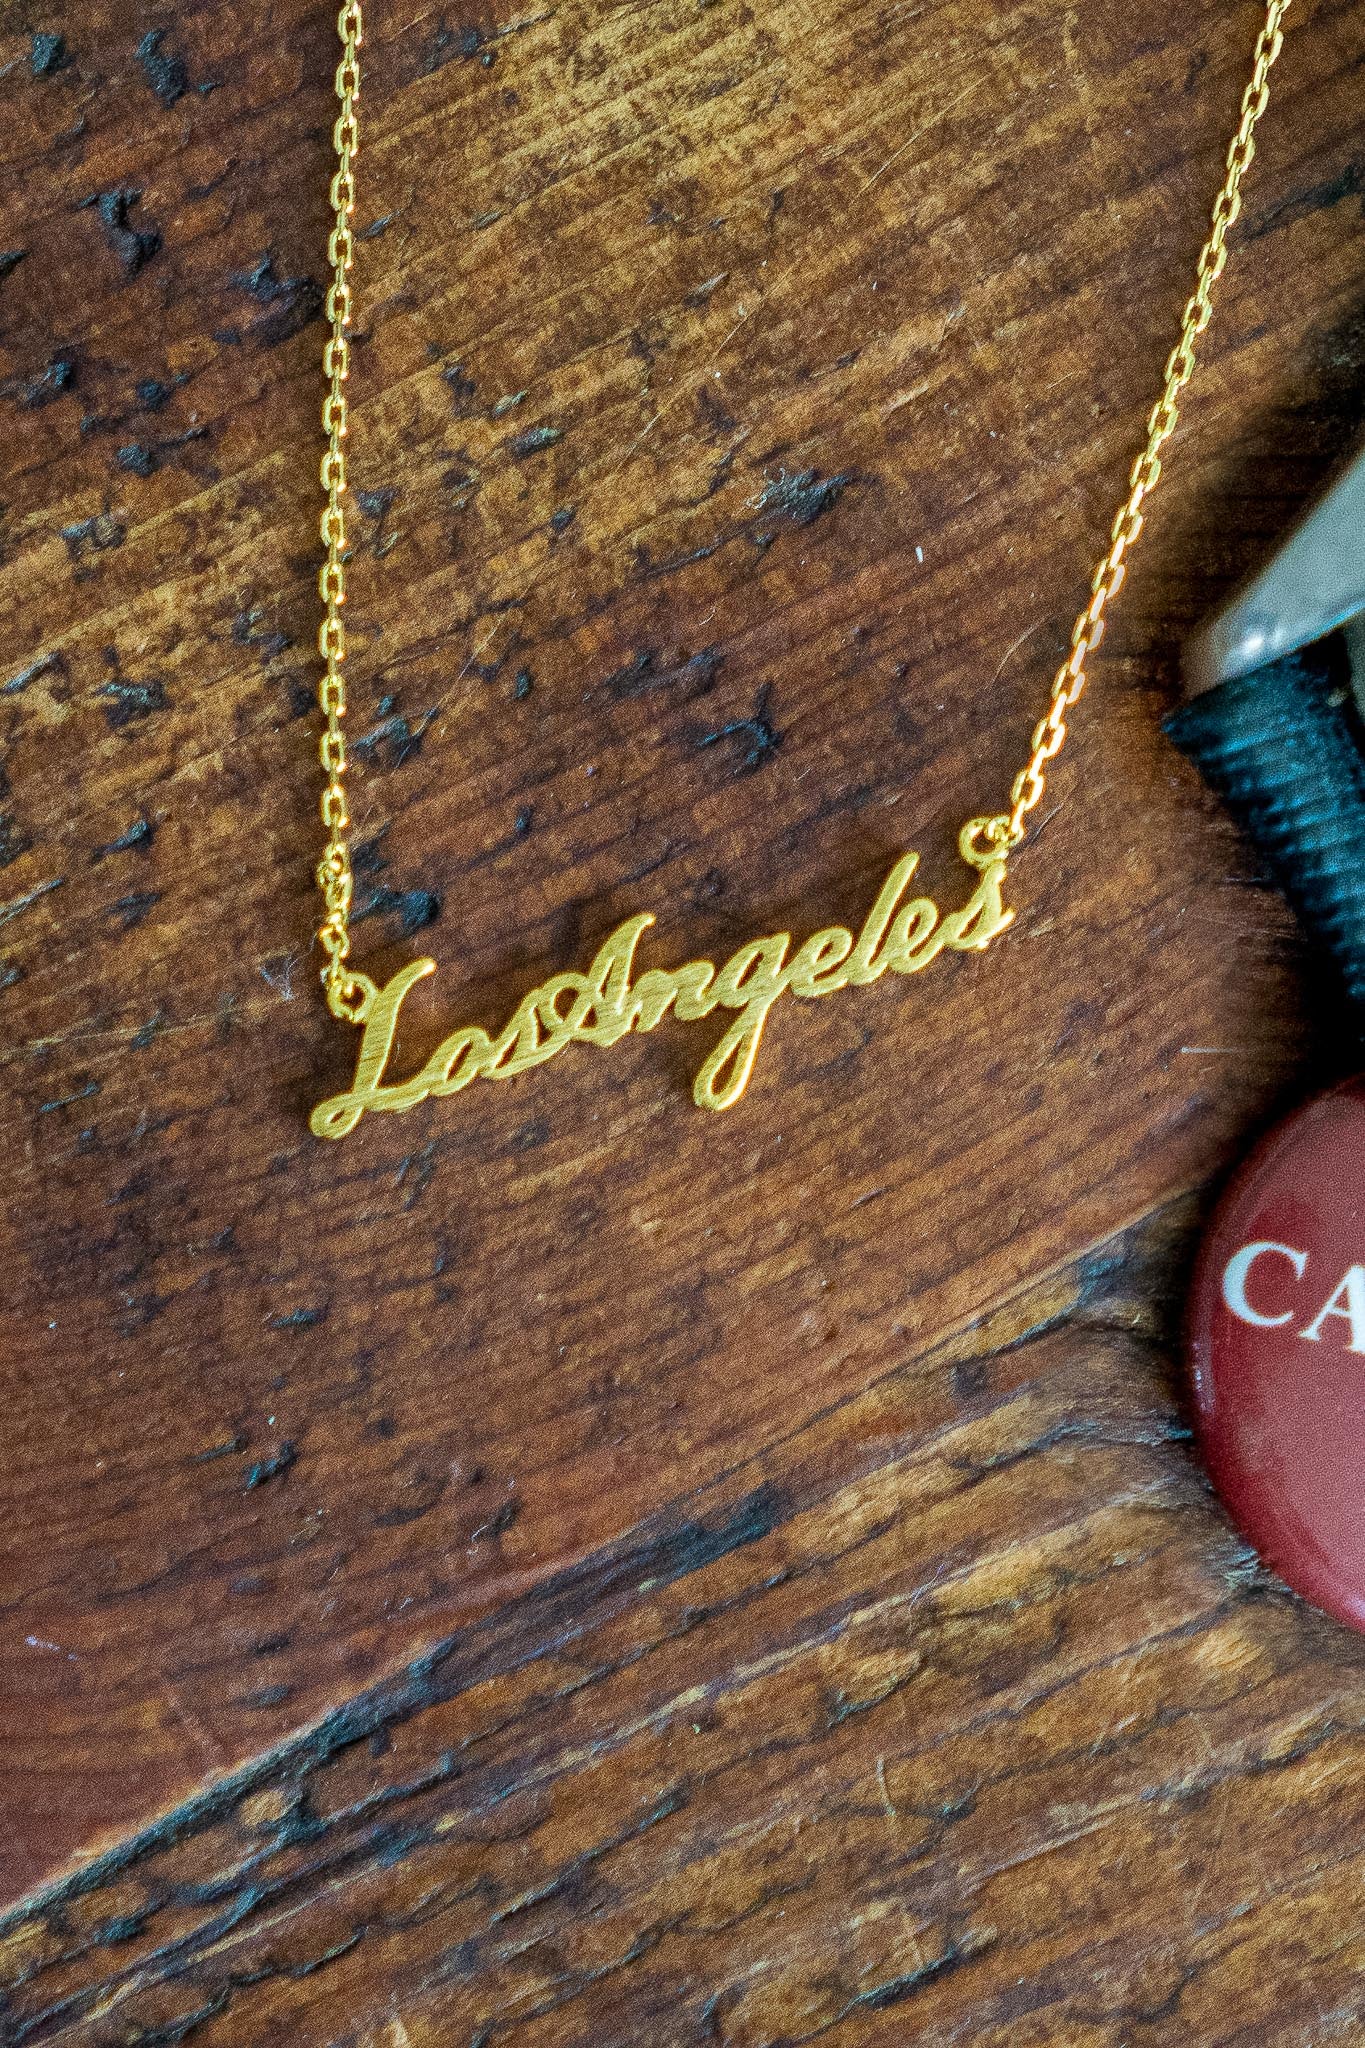 Los Angeles Script Necklace Jewelry Fame